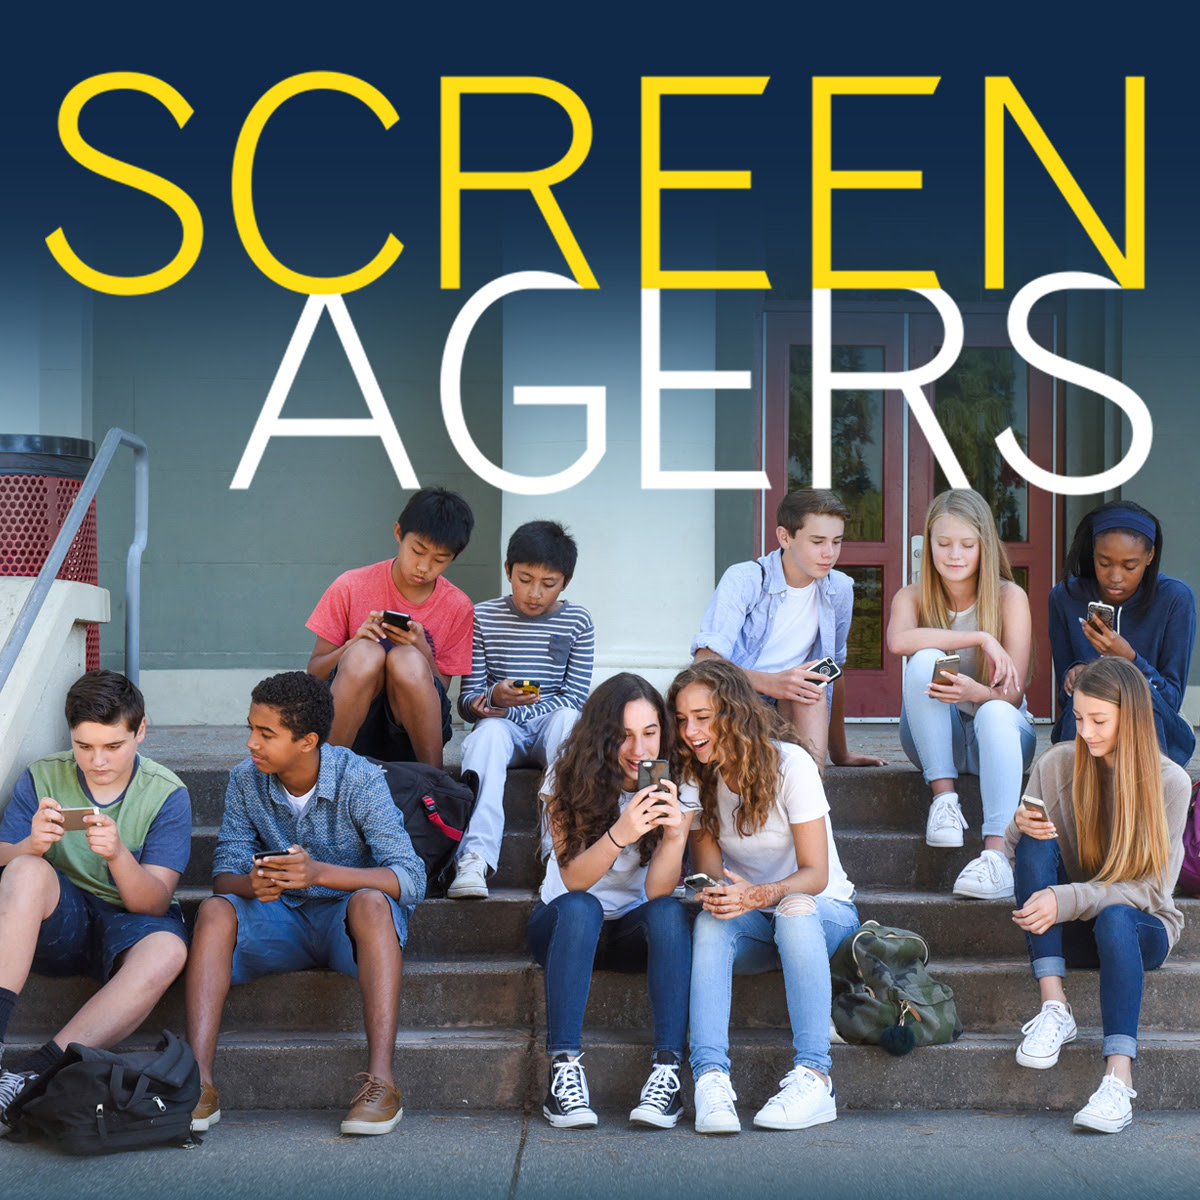 Screenagers Film Presented By Hortonville Middle School